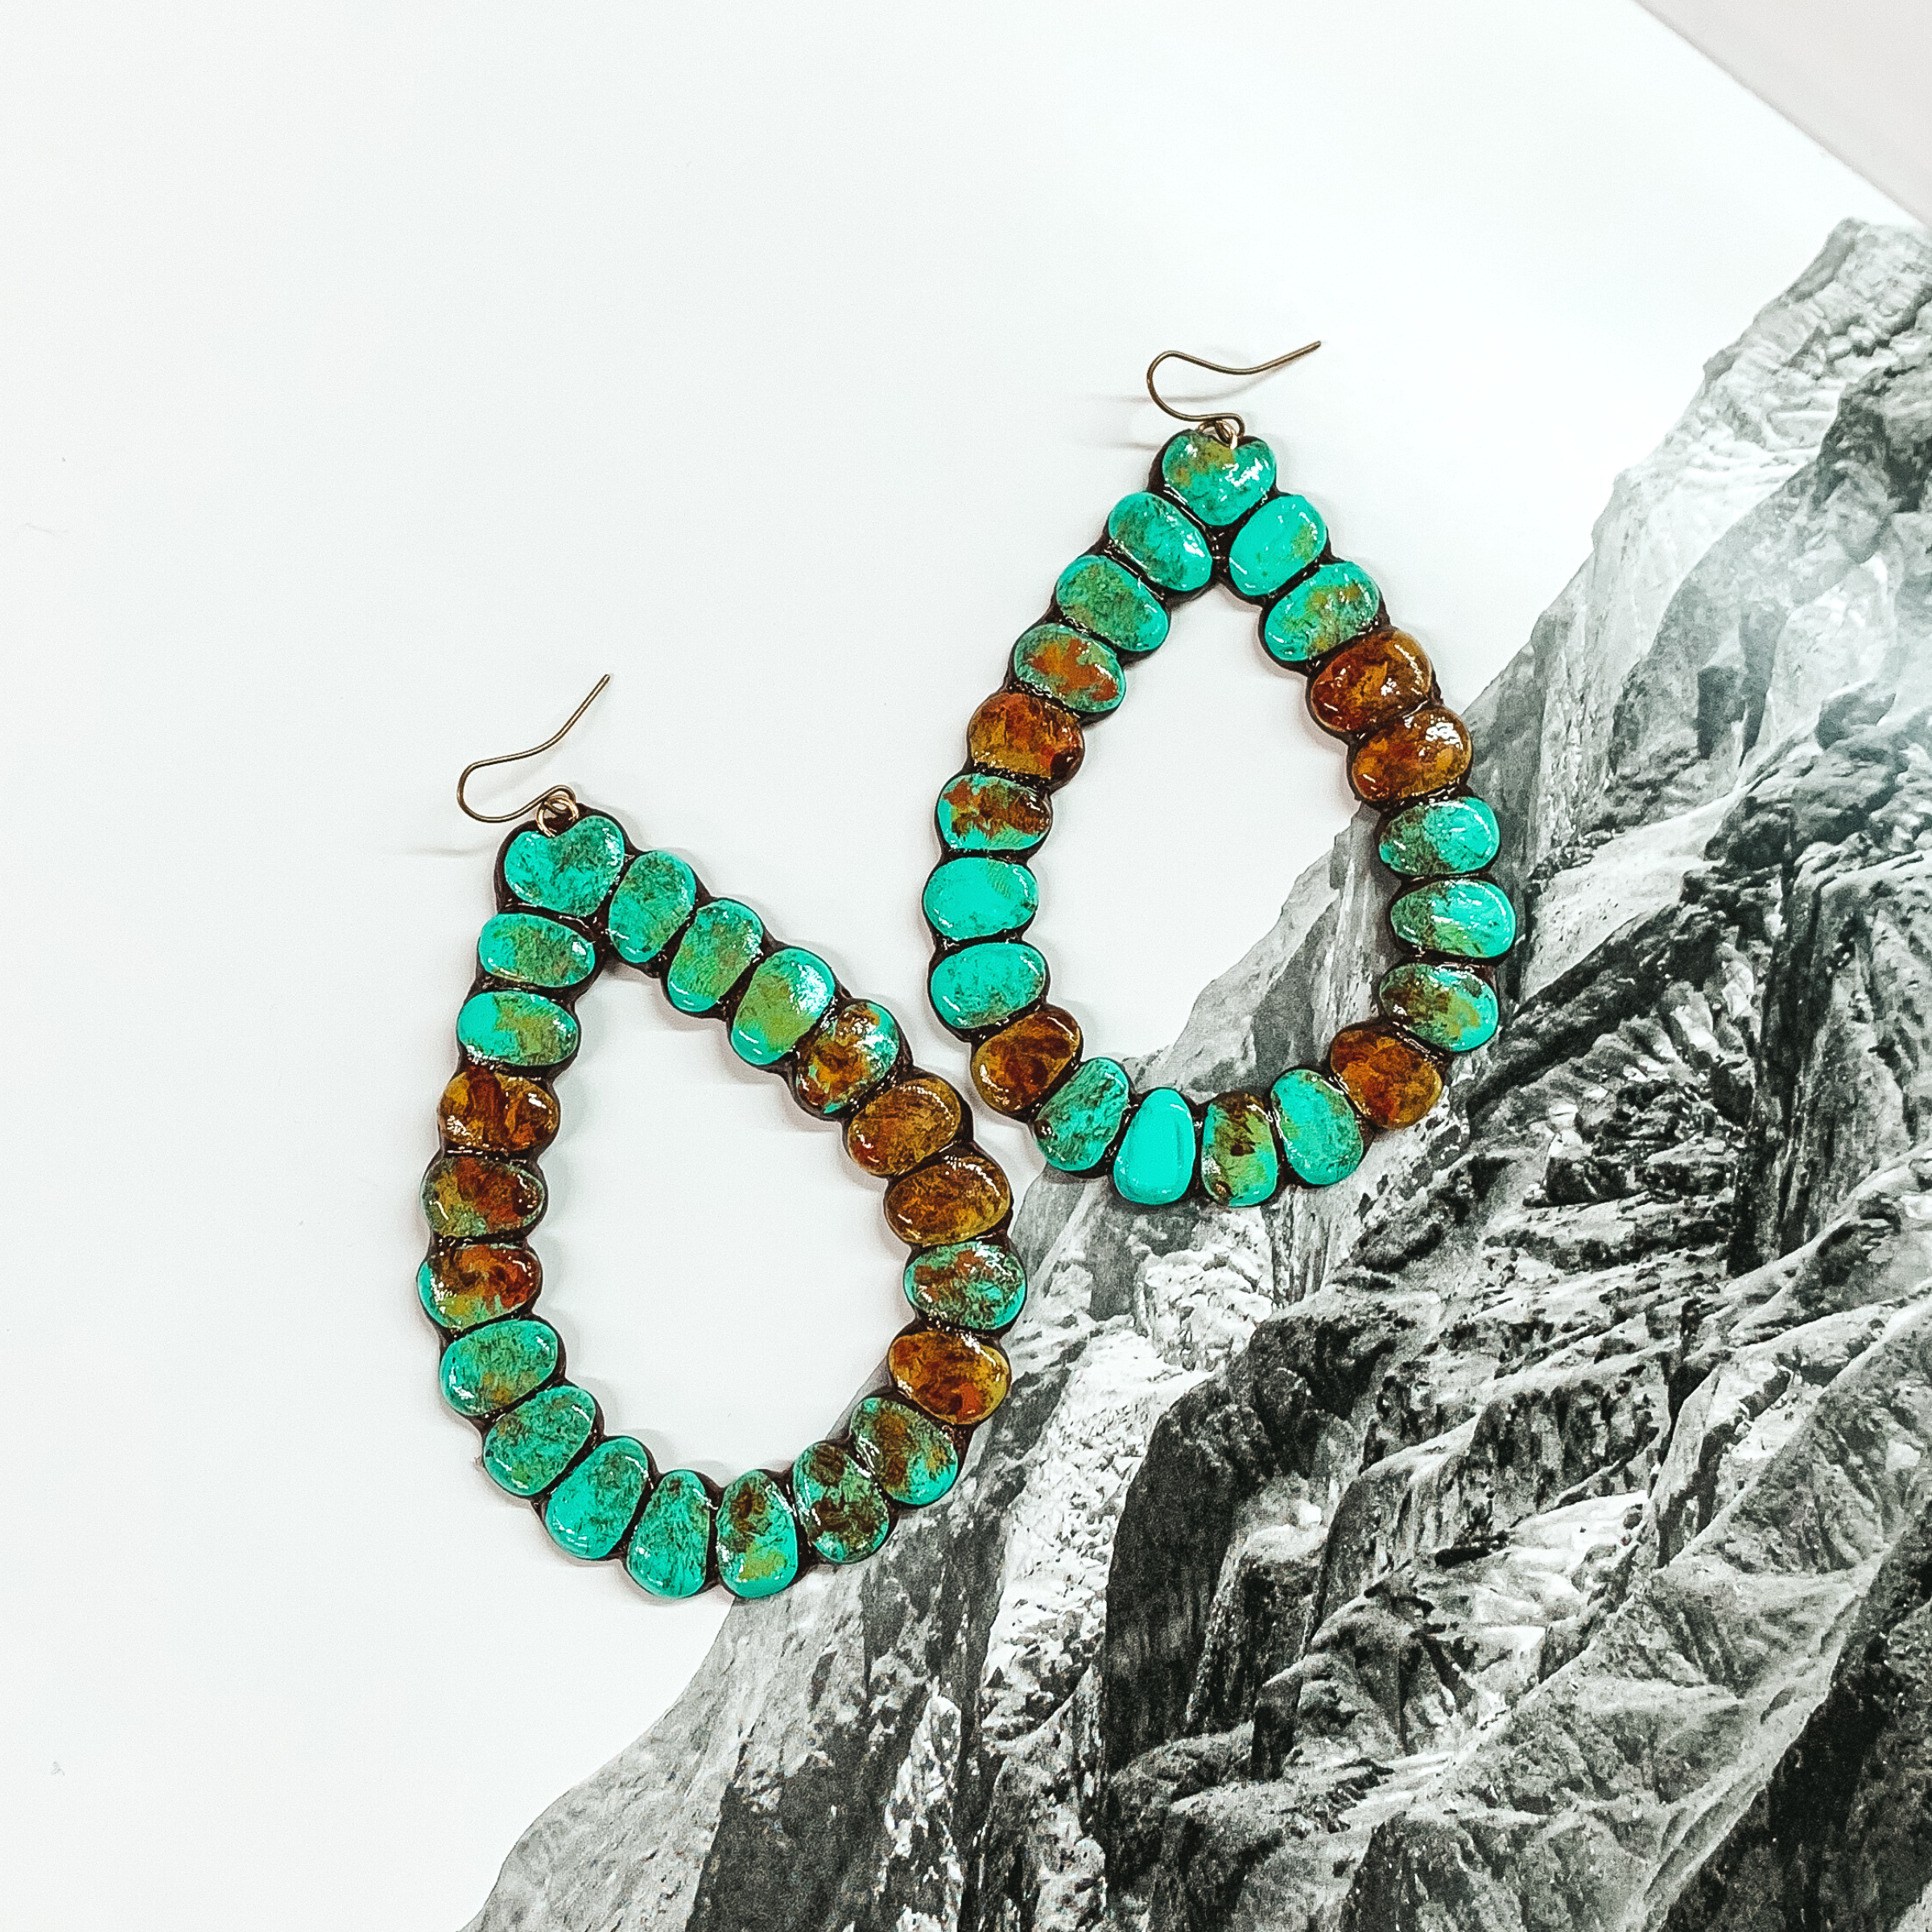 Open teardrop earrings in turquoise and tan. These earrings are pictured on a black and white mountain picture. 